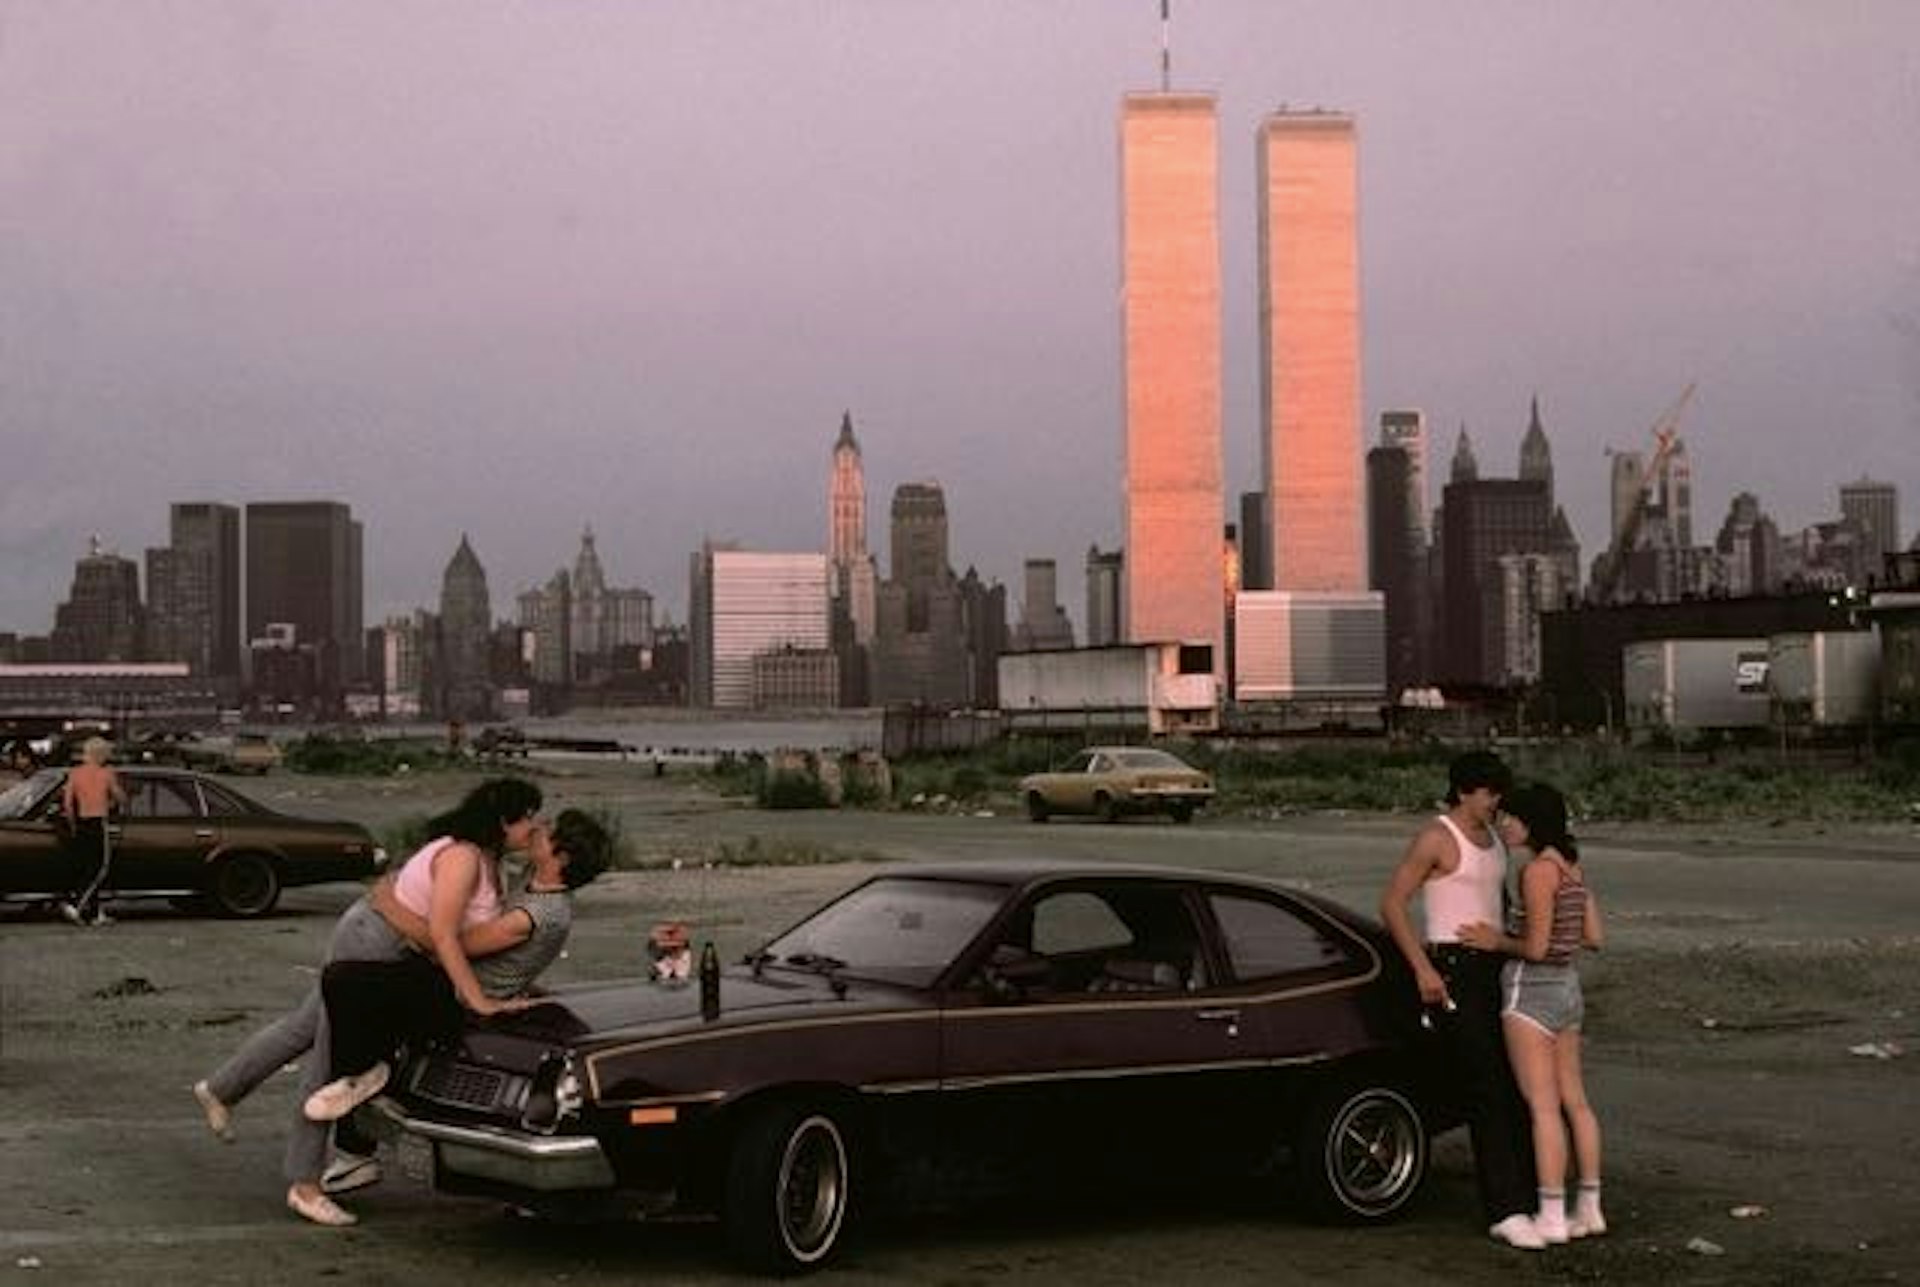 USA. New Jersey. 1983. Downtown Manhattan seen from "lover's lane' in New Jersey.